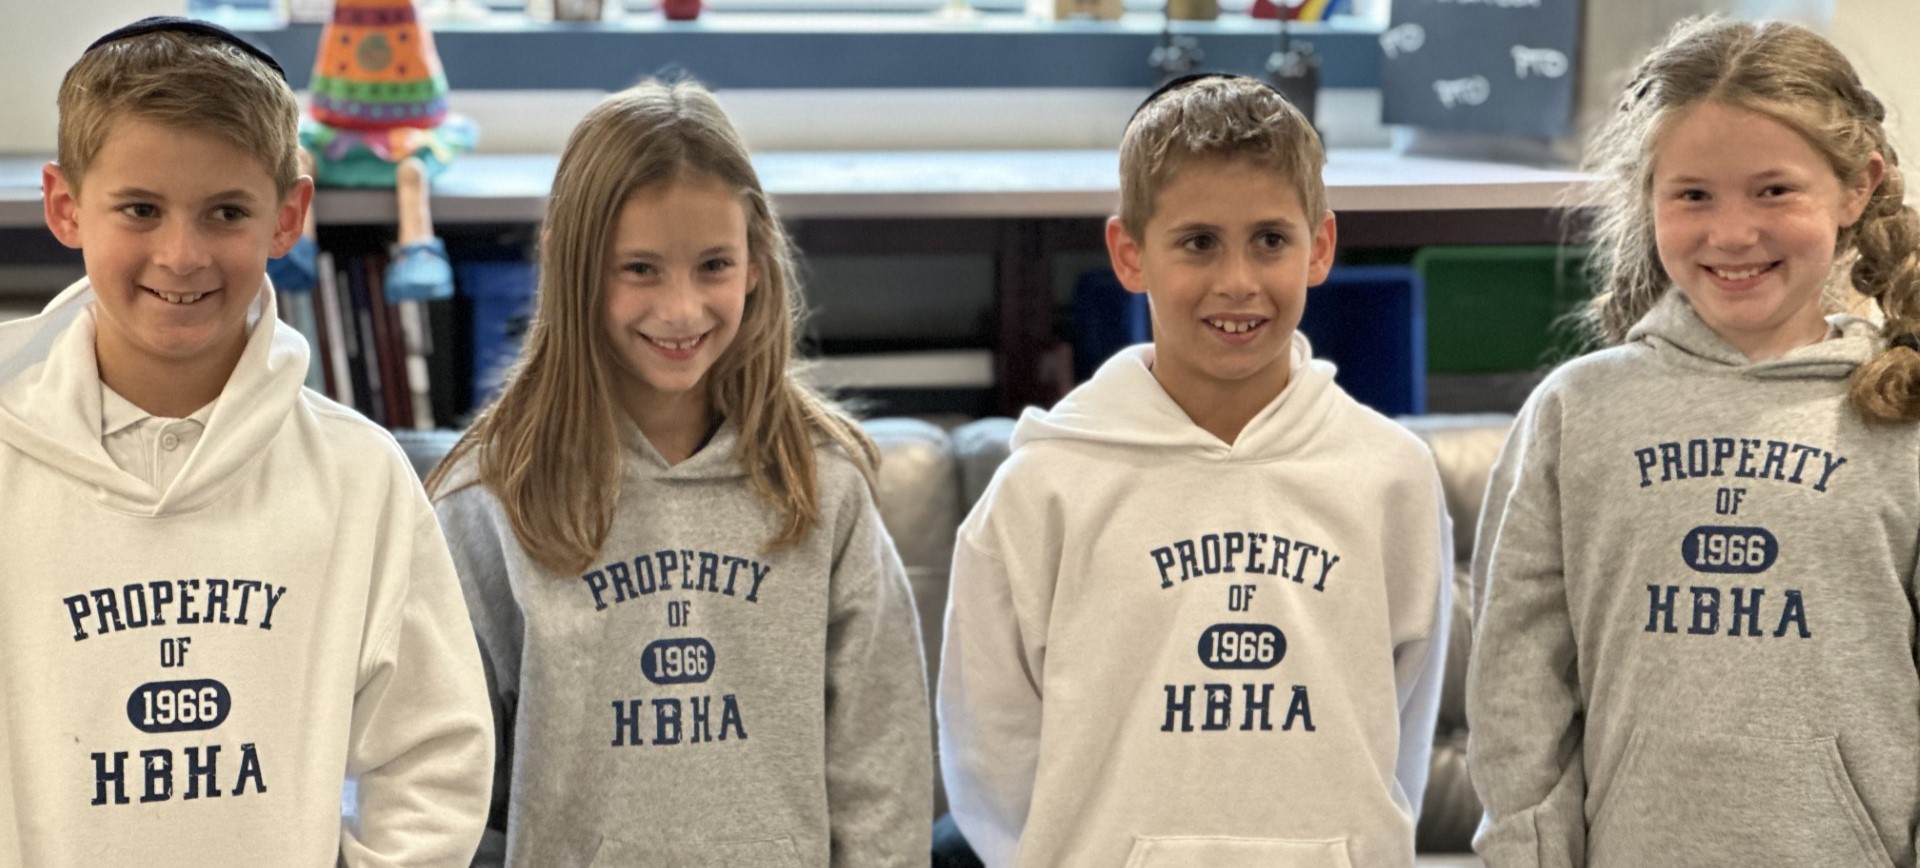 Four young HBHA students smile in matching gray or white sweatshirts that say: Property of HBHA (1966)